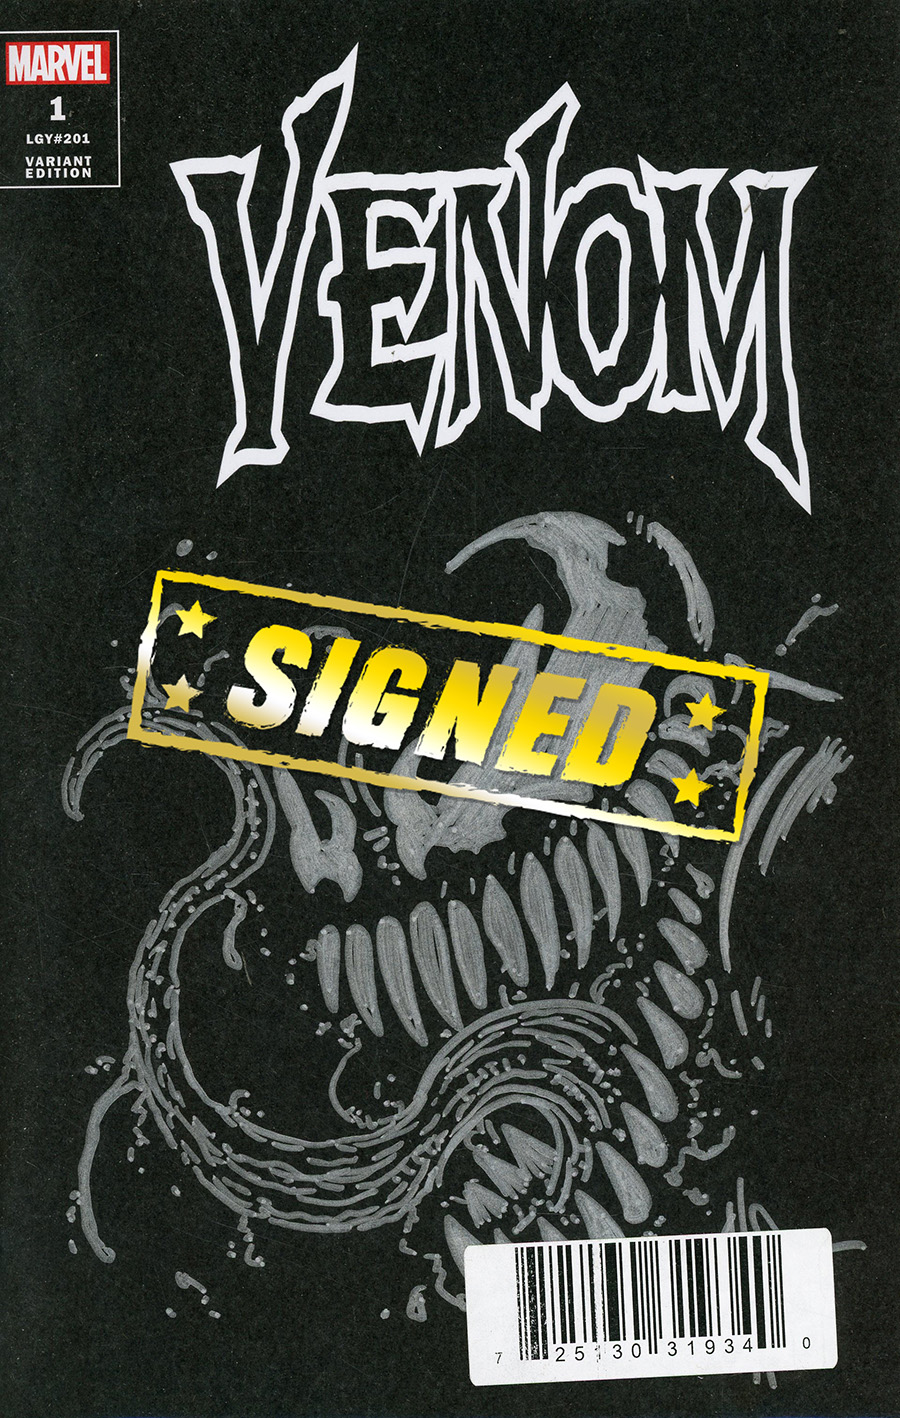 Venom Vol 5 #1 Cover N DF Black Blank Commissioned Cover Art Signed & Remarked By Ken Haeser With A Silver Symbiote Hand-Drawn Sketch